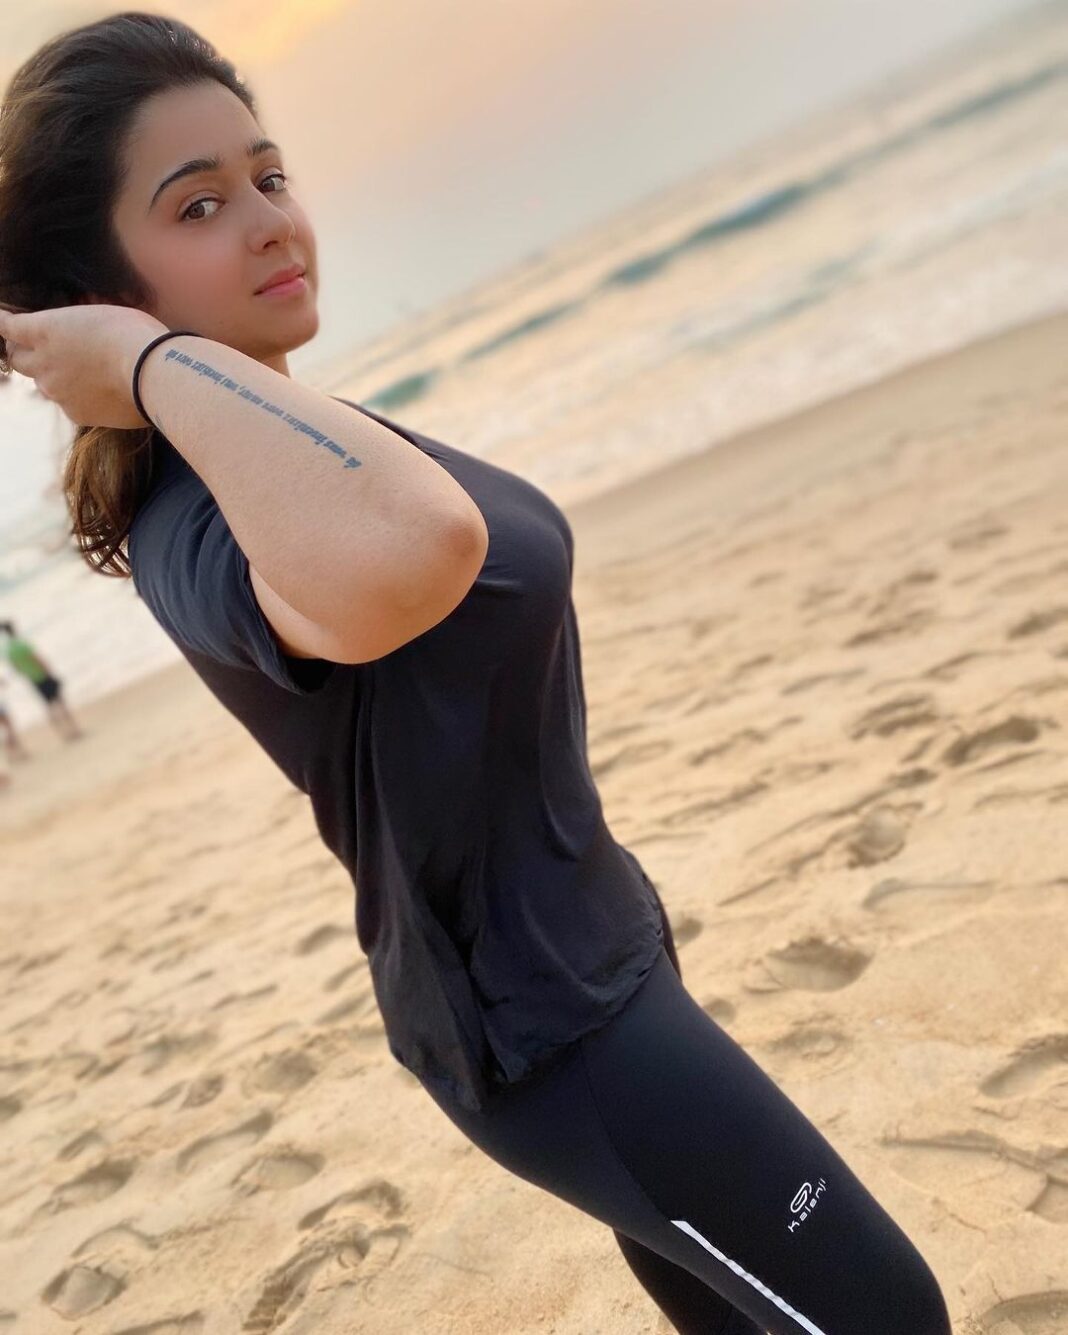 Charmy Kaur Instagram - U can’t stop the waves but u can learn to surf 😉 #fitness #beach #shootmode #goa #romantic #producer #PCfilm 💋